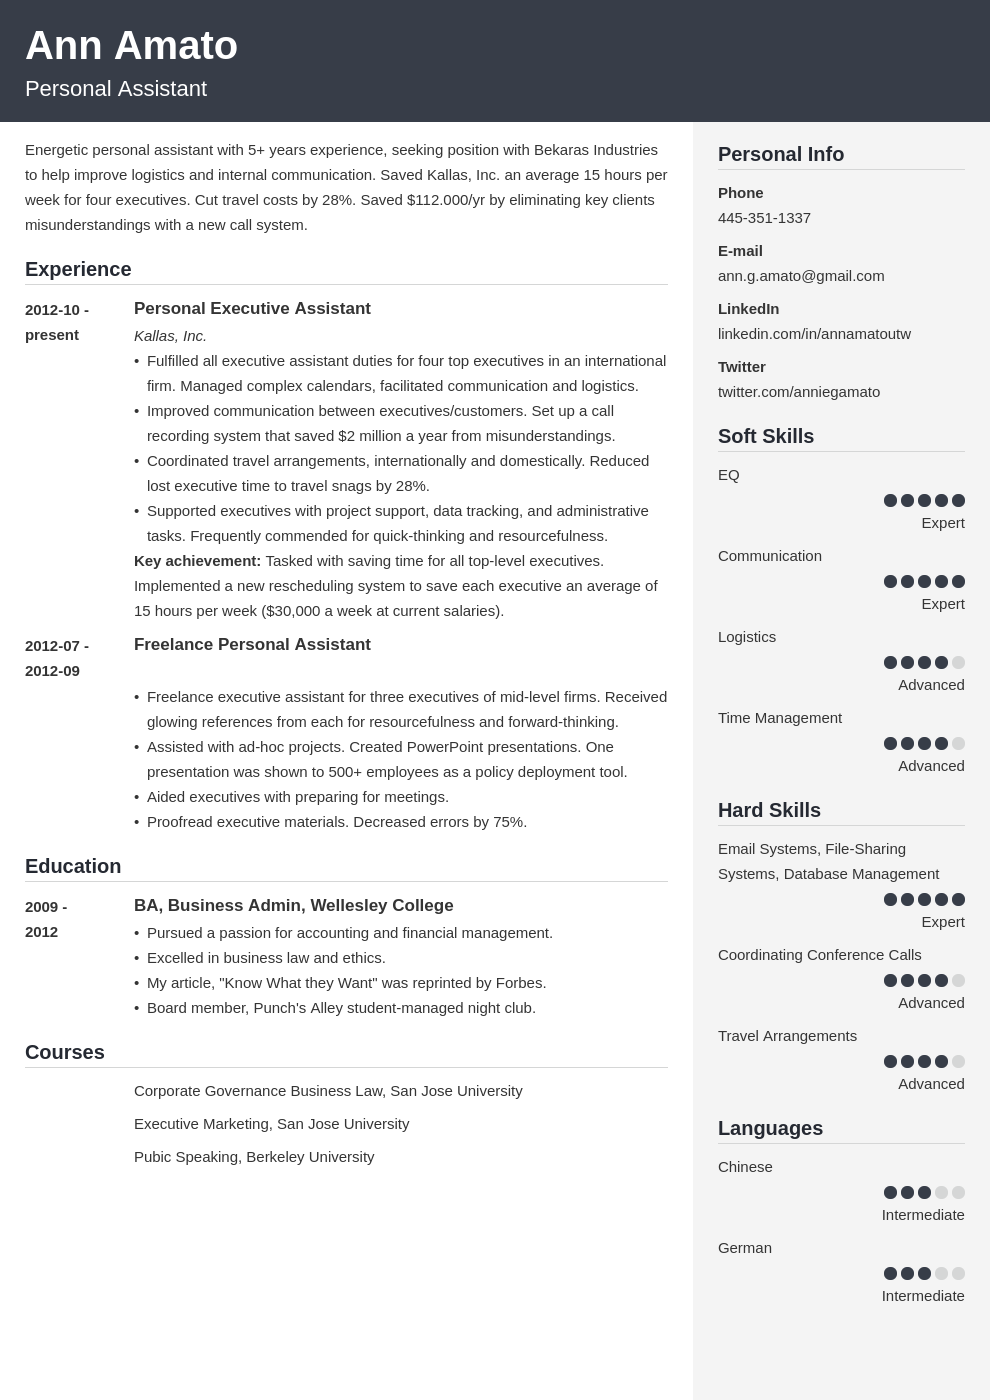 Exploring the Best Resume Formats — The Complete Guide